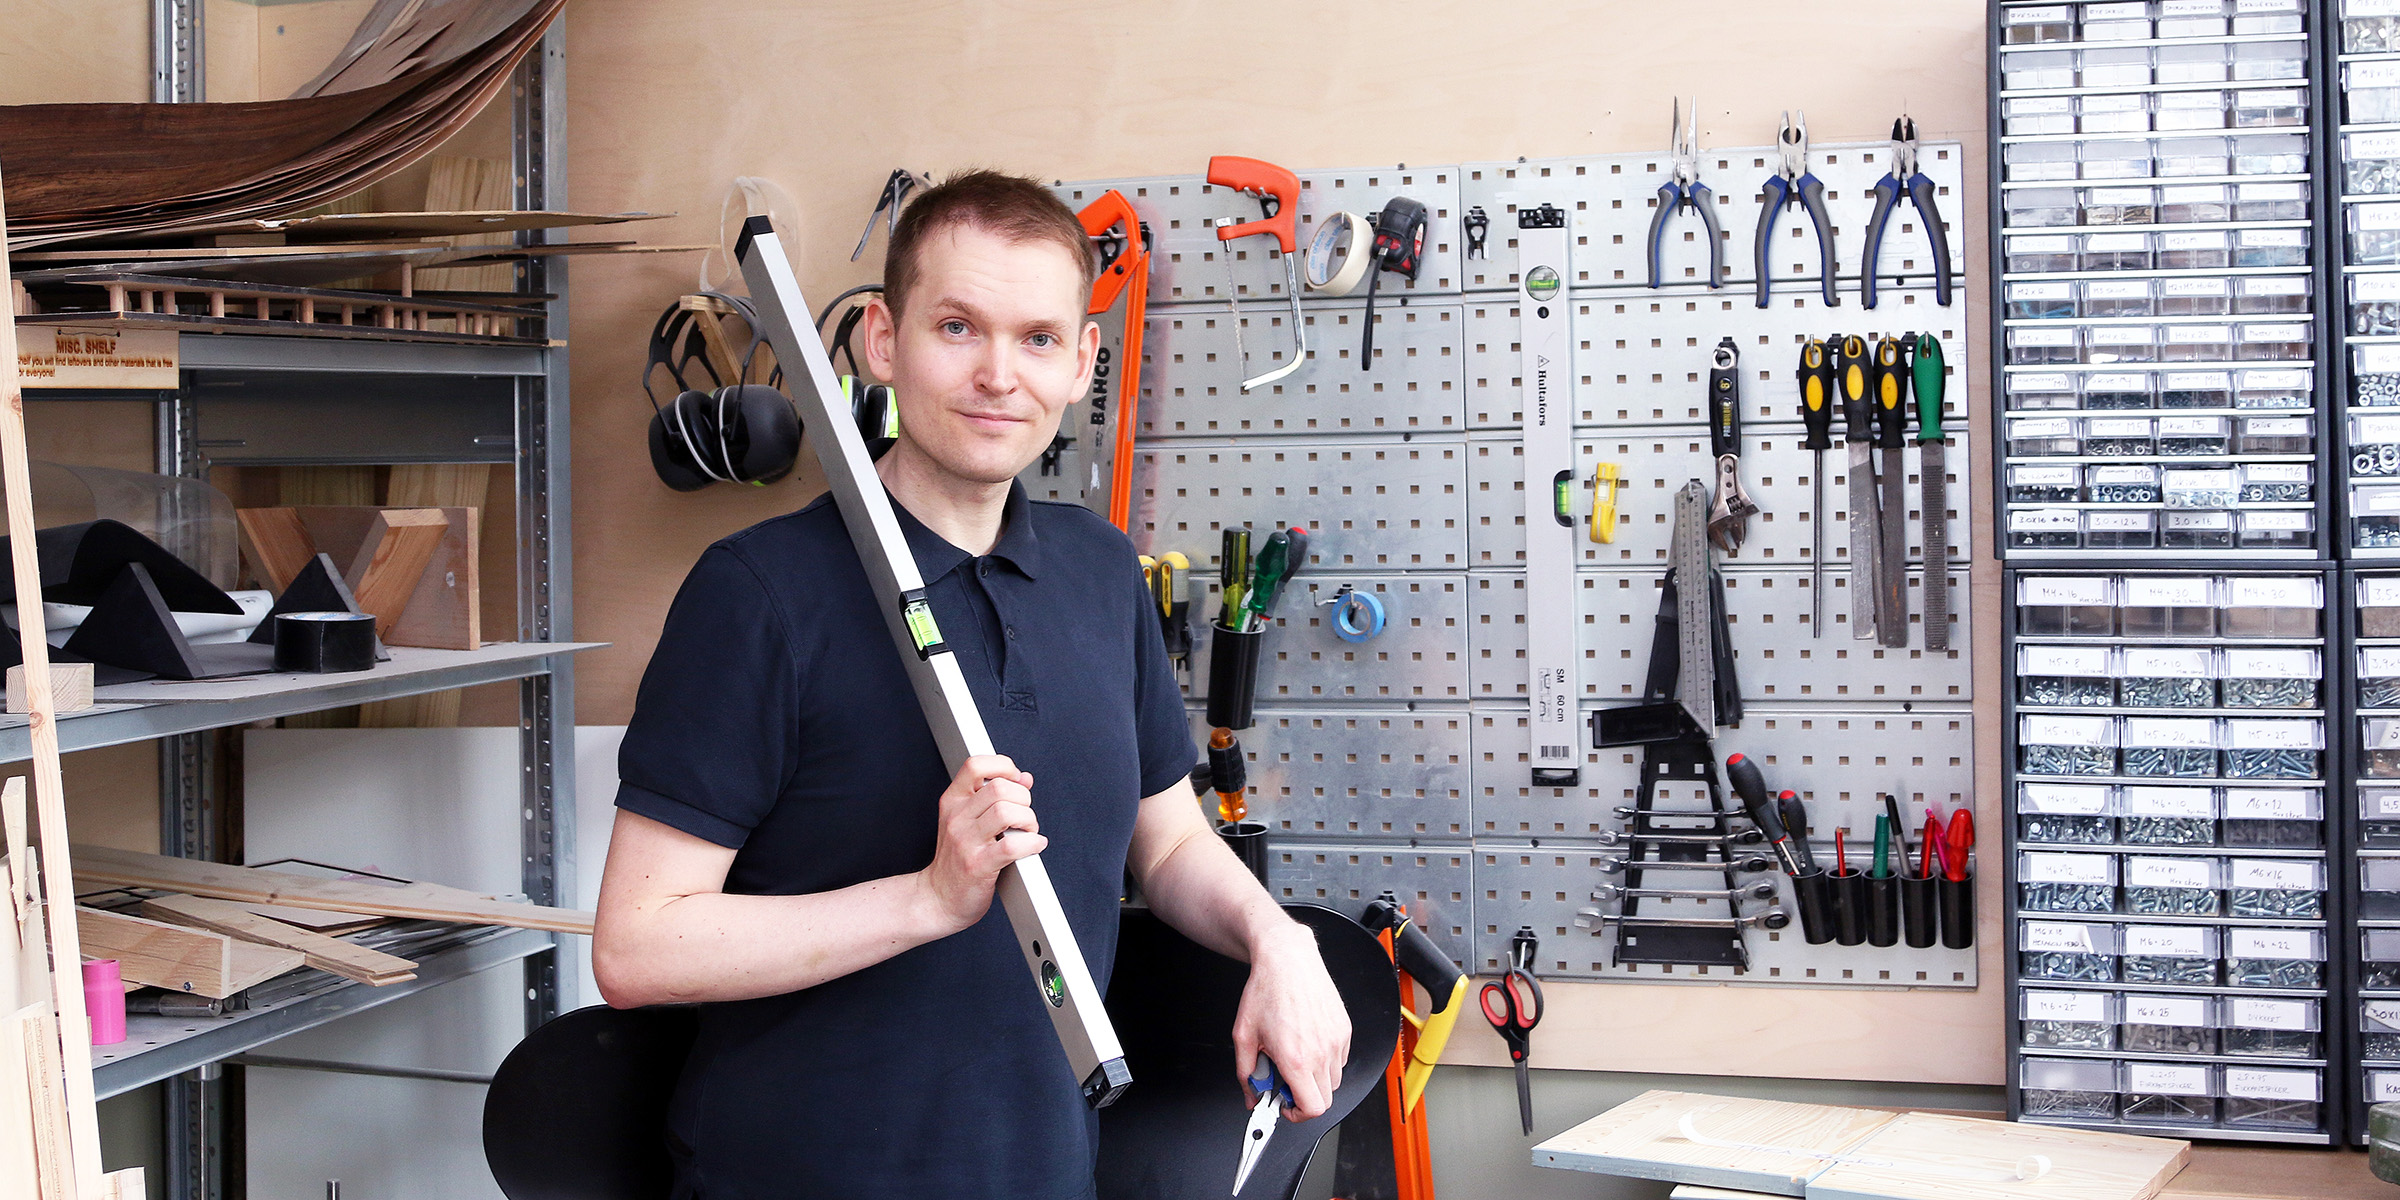 Lars with tools at OsloMet Makerspace. He has spirit levels and pliers in his hands, and on the wall behind are various tools and screws.